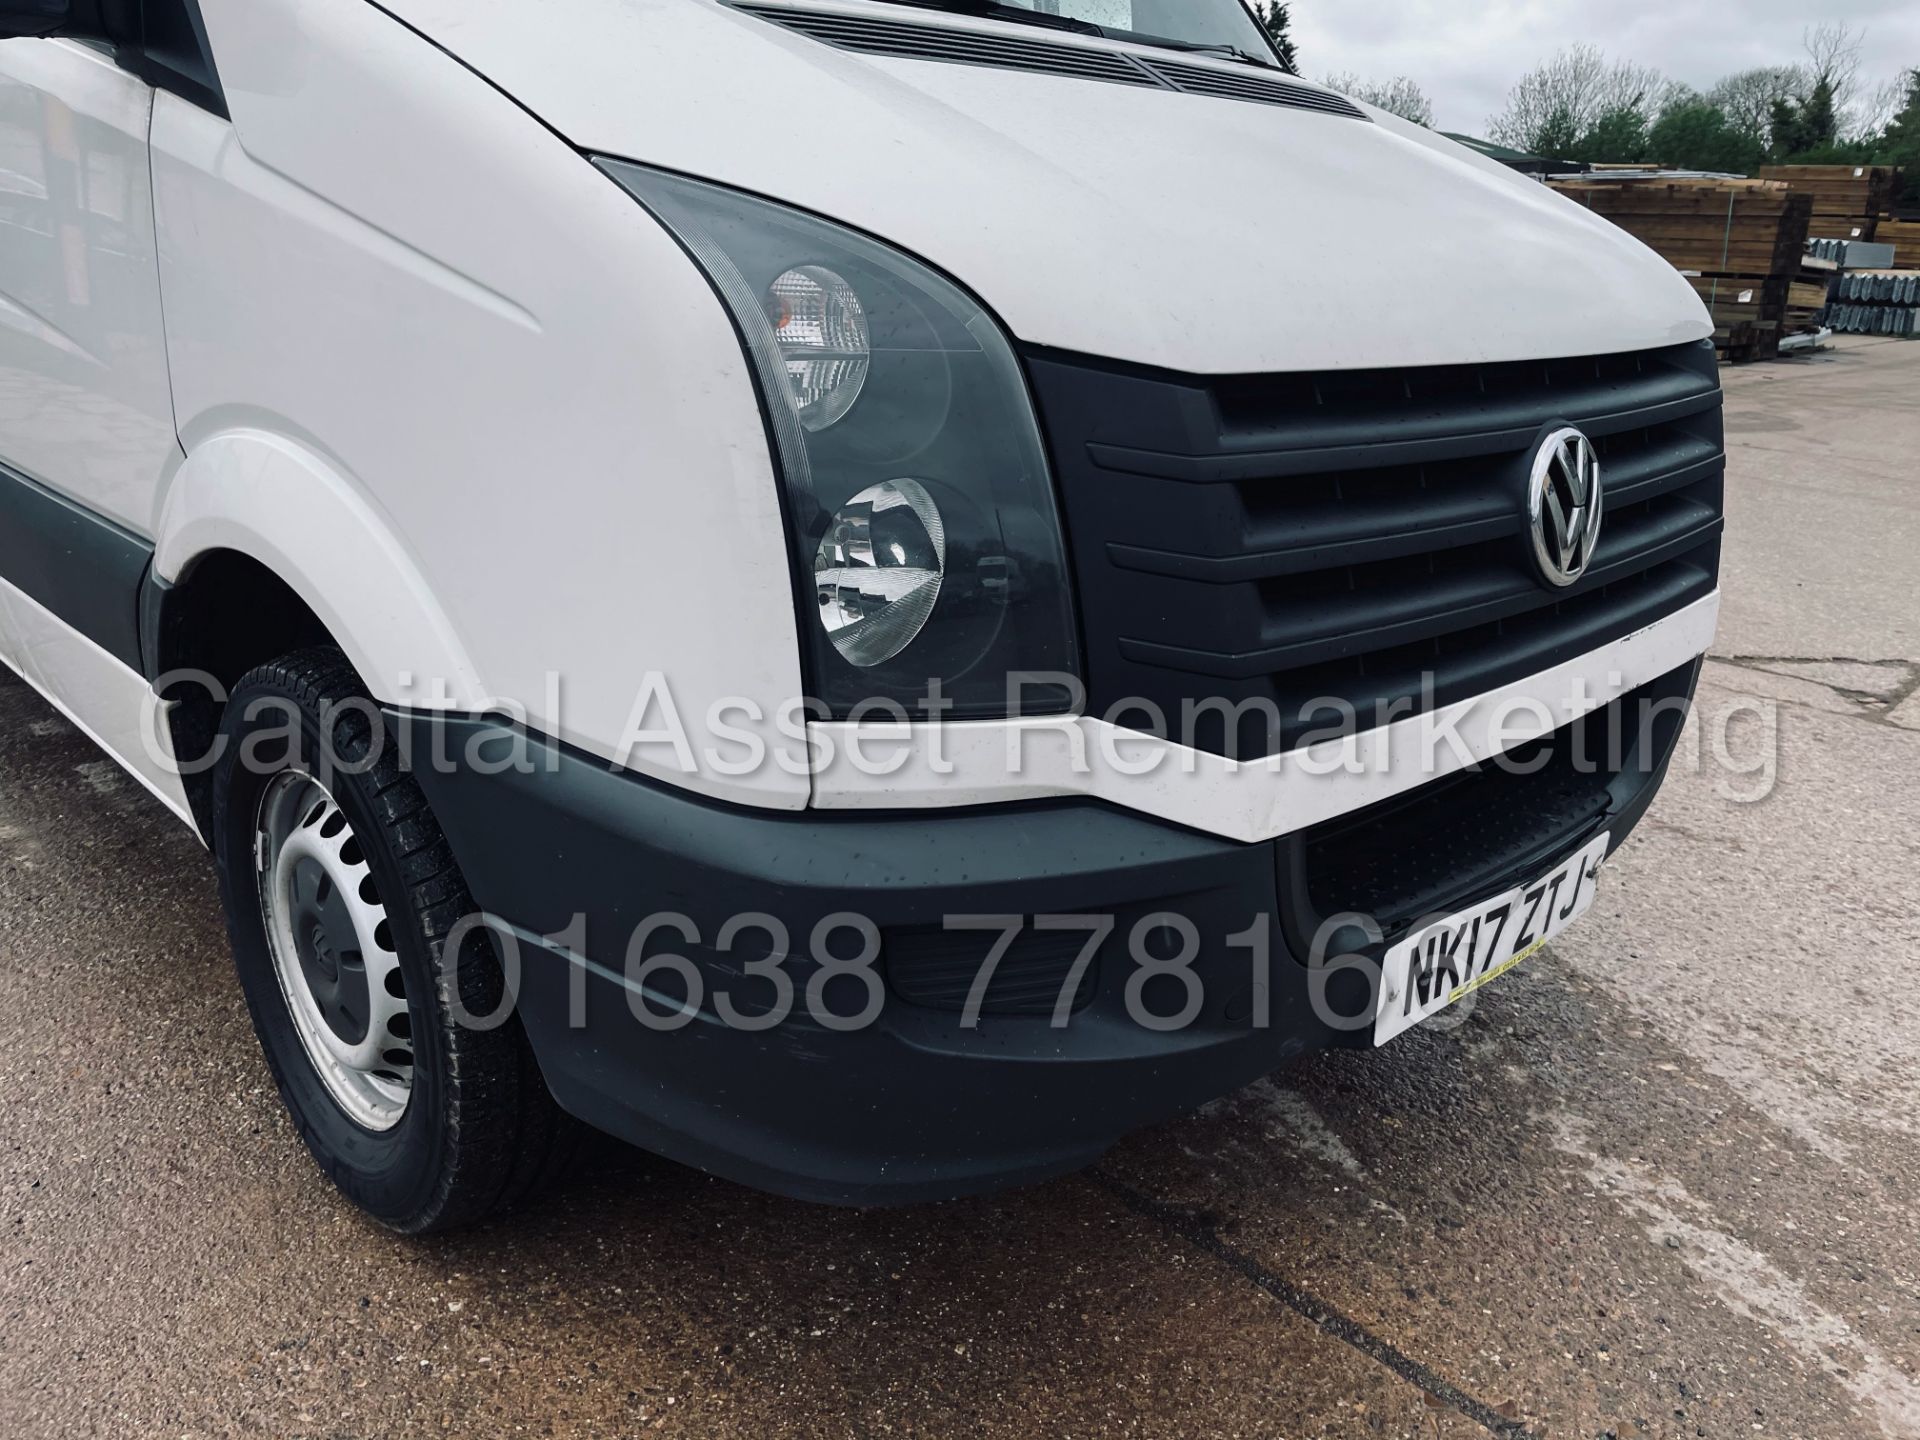 (On Sale) VOLKSWAGEN CRAFTER *LWB HI-ROOF* (2017 - EURO 6) '2.0 TDI BMT - 6 SPEED' *CRUISE CONTROL* - Image 15 of 39